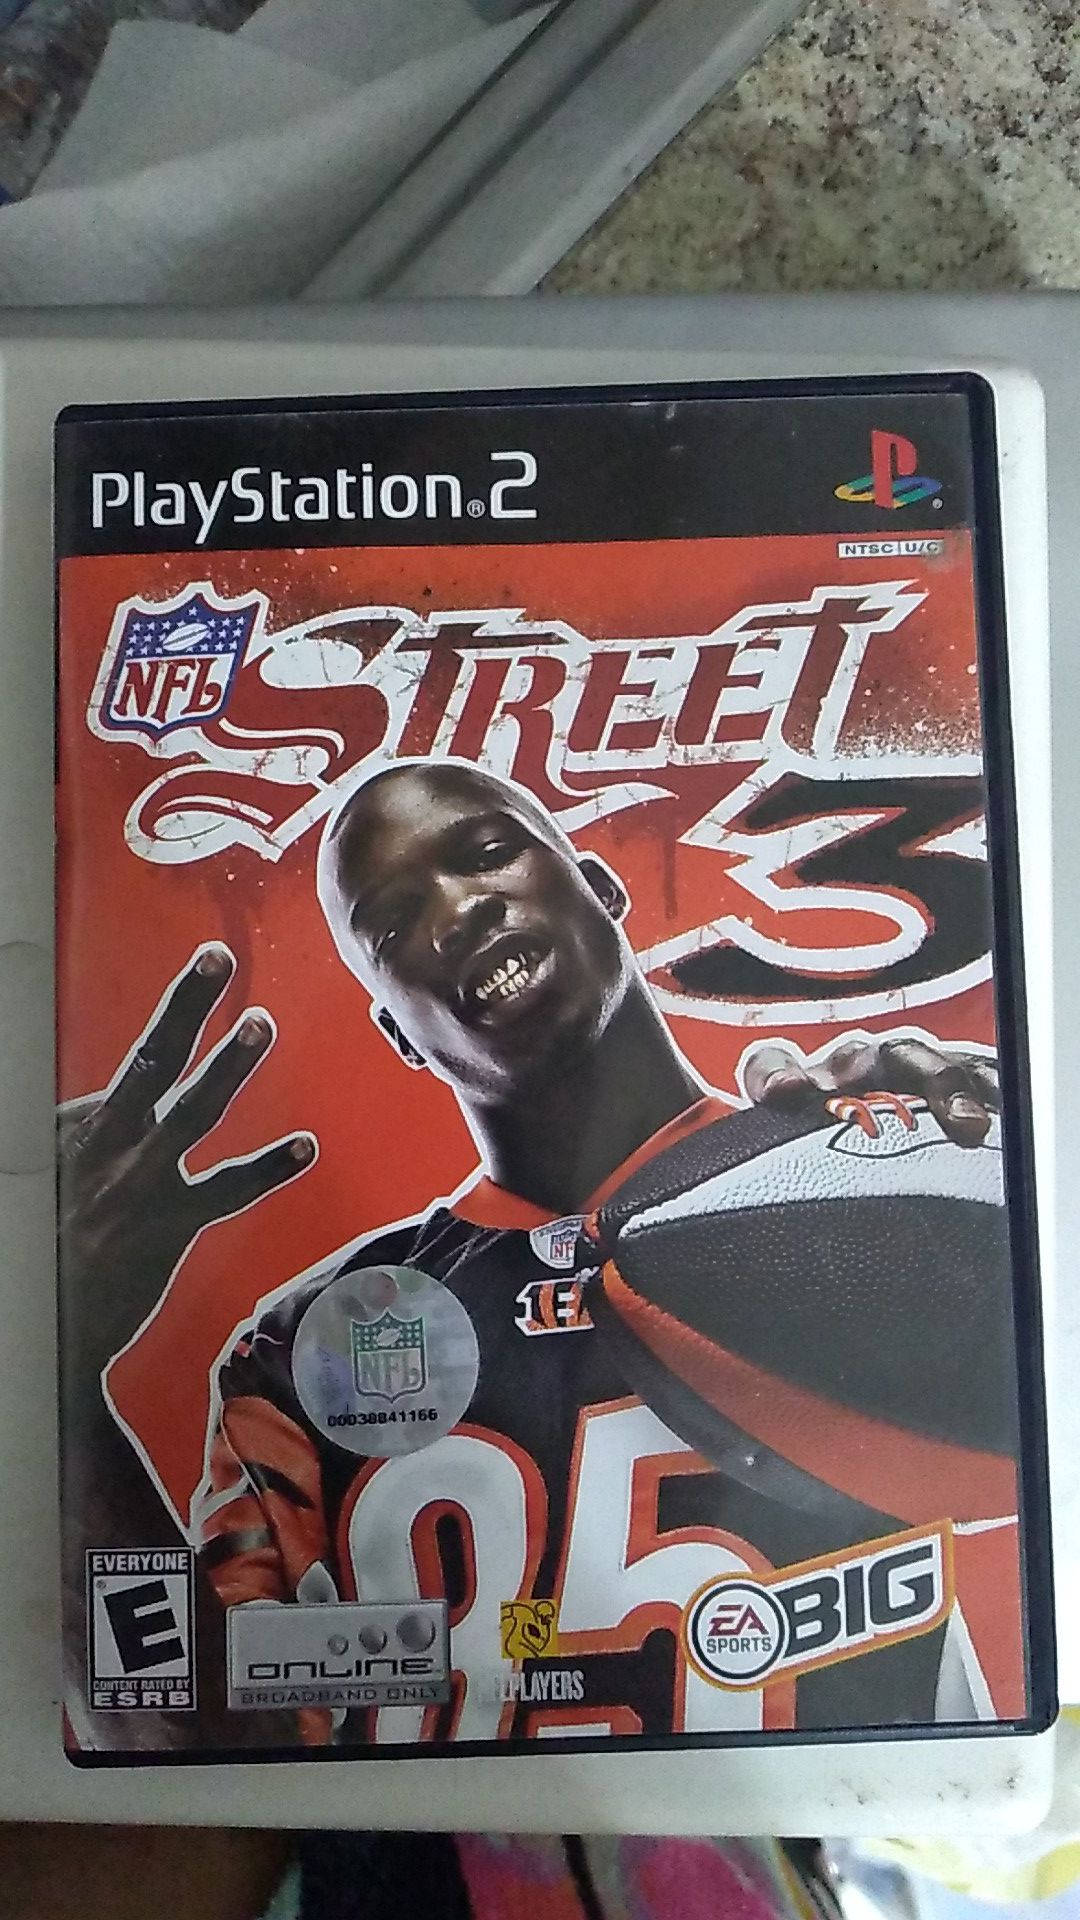 PS2 , Playstation 2 game